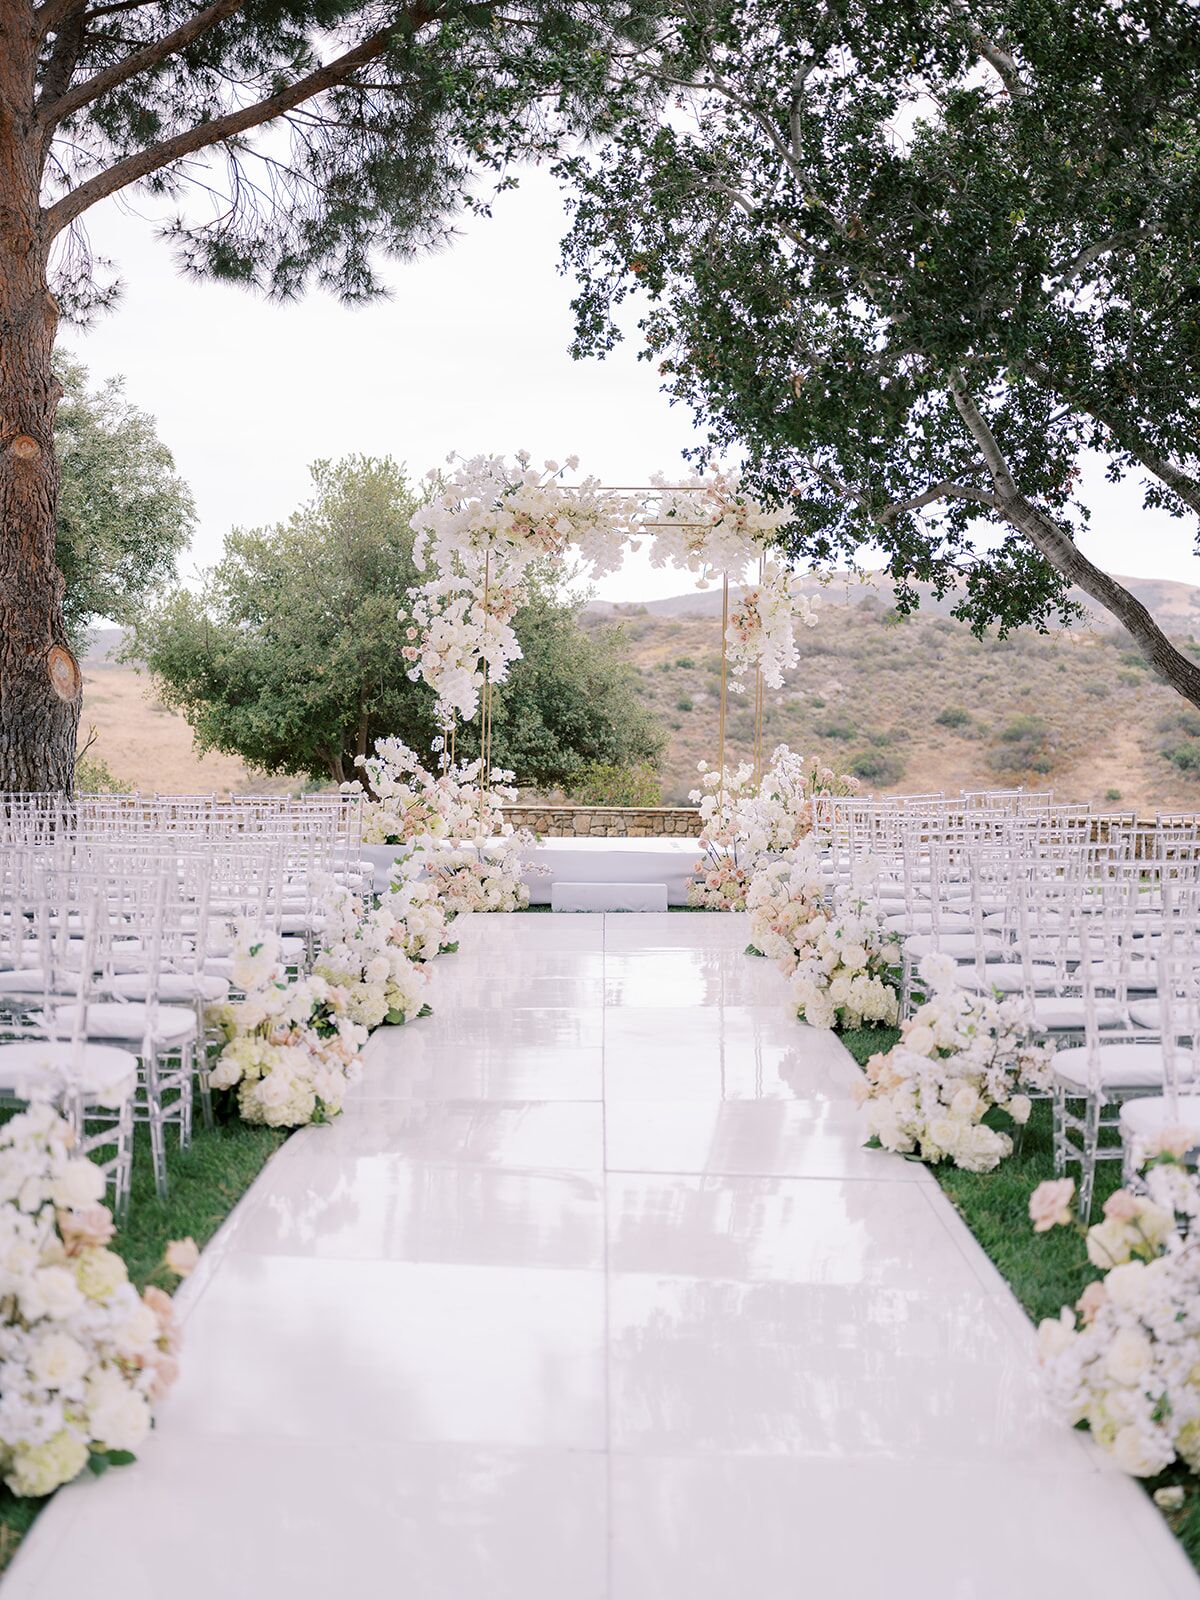 Grace and Gold Events | Wedding Planners - The Knot